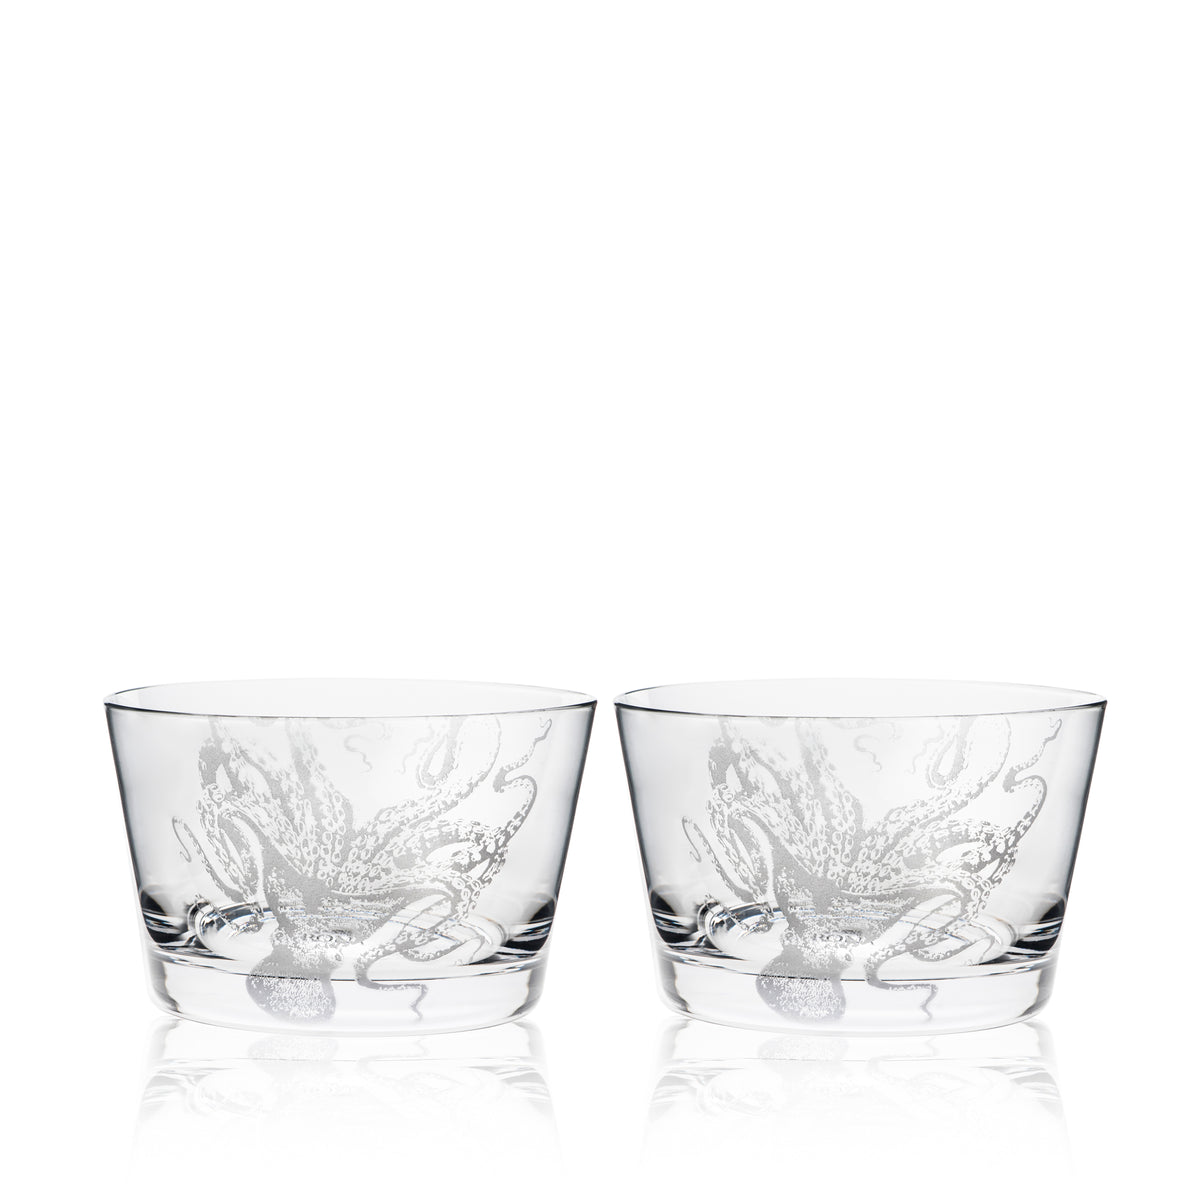 Lucy the Octopus crystal glass tidbit bowls in a set of 2 from Caskata